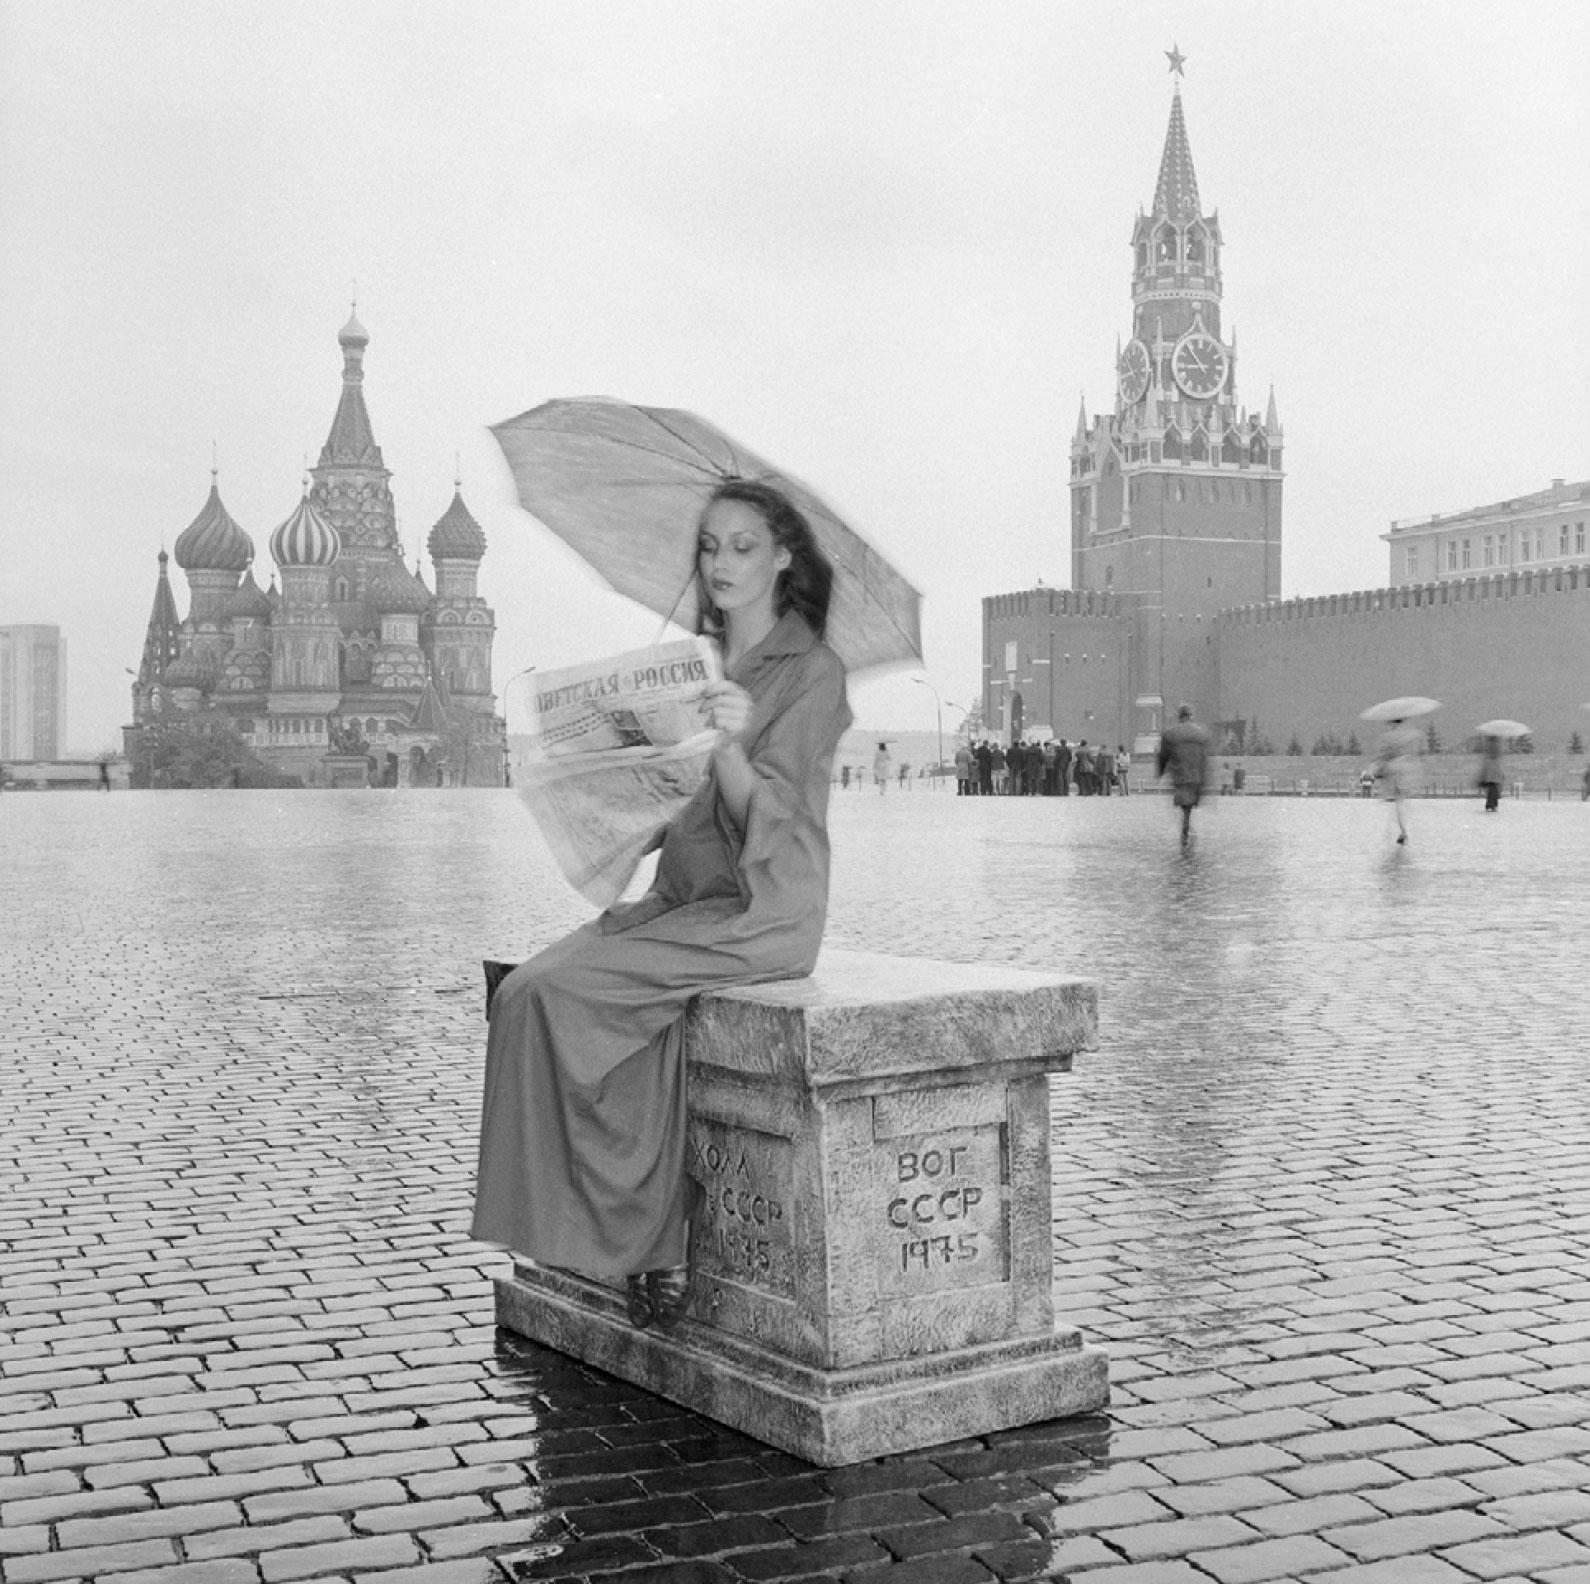 Norman Parkinson Black and White Photograph - Jerry Hall, Vogue Russia, Red Square 